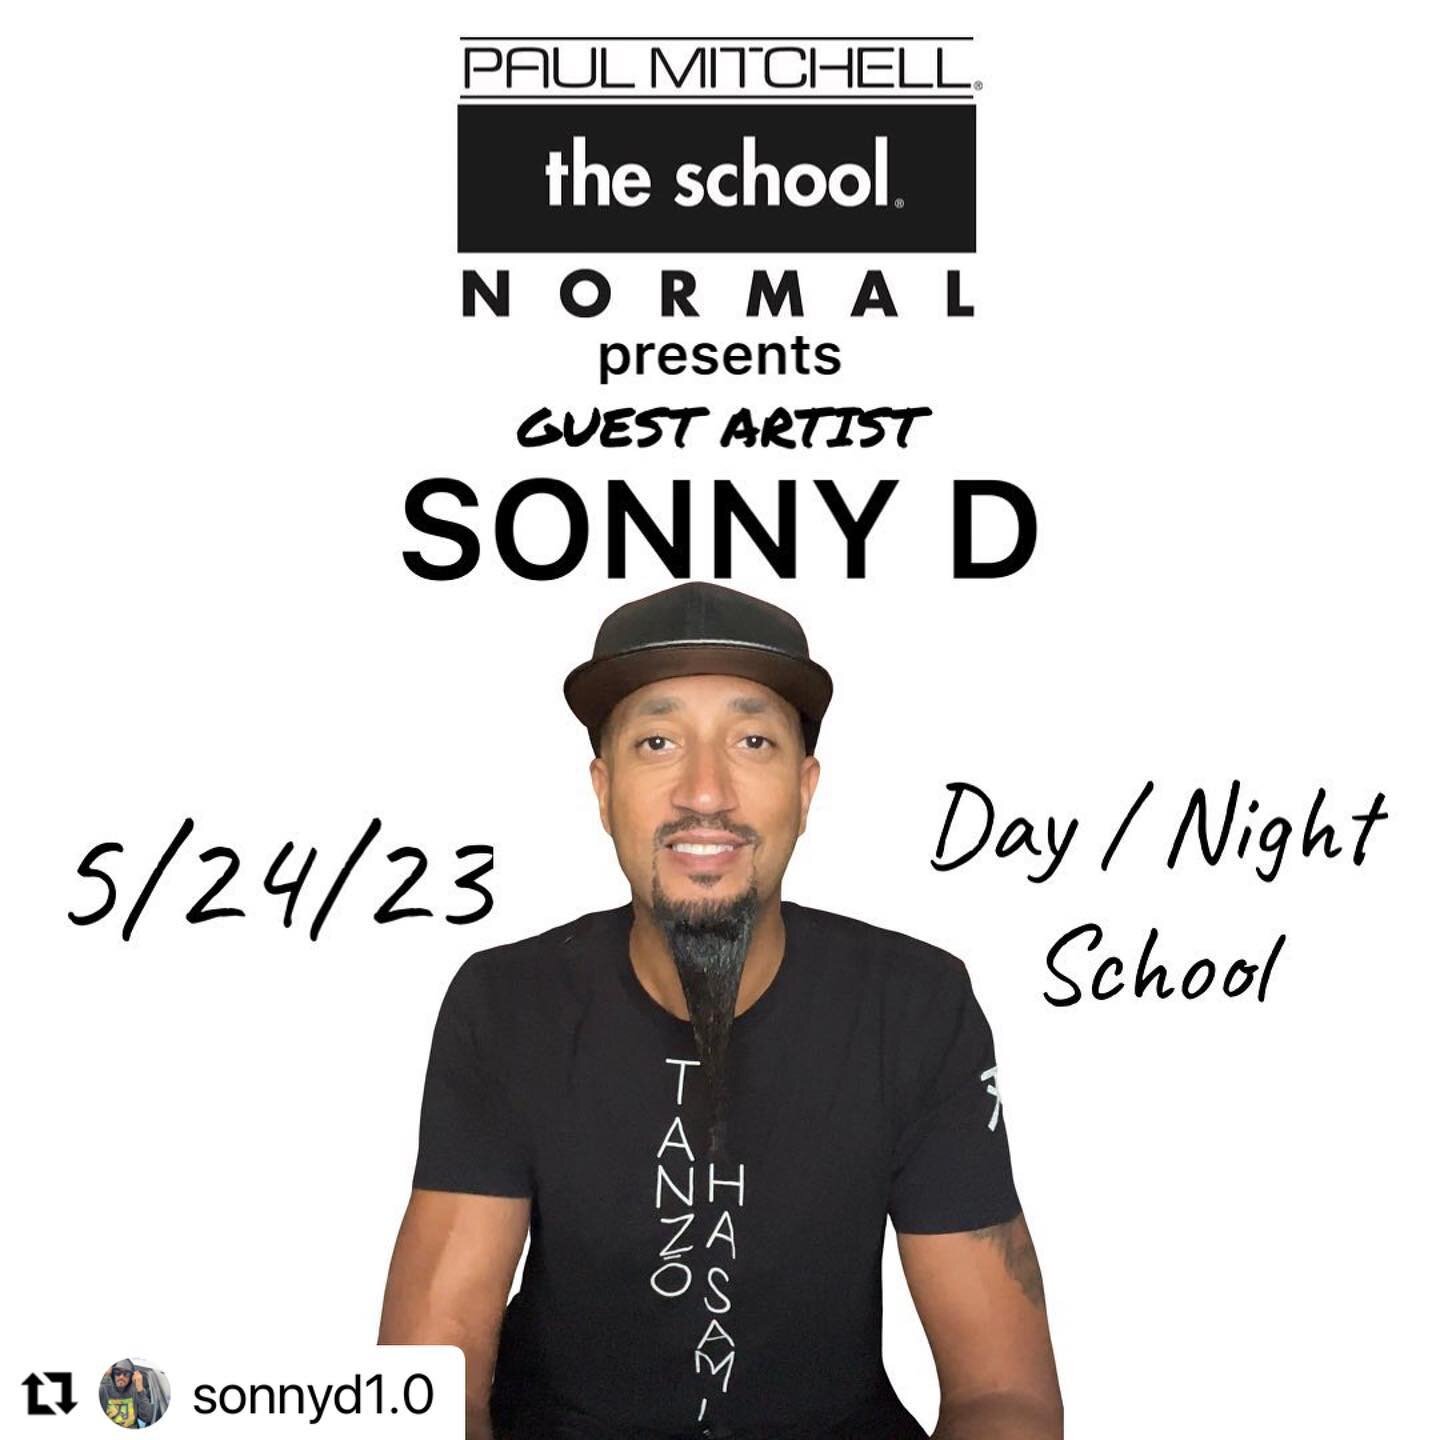 Will I see you in the room! @pmtsnormal guest artist Top 20 Day of education! If you know you know!
&bull;
&bull;
&bull;

#tanzohasami #scissors #haircuts #haircutting #japanesesteel #scissorwork #precisioncutting #haircutters #scissoreducation #pmts